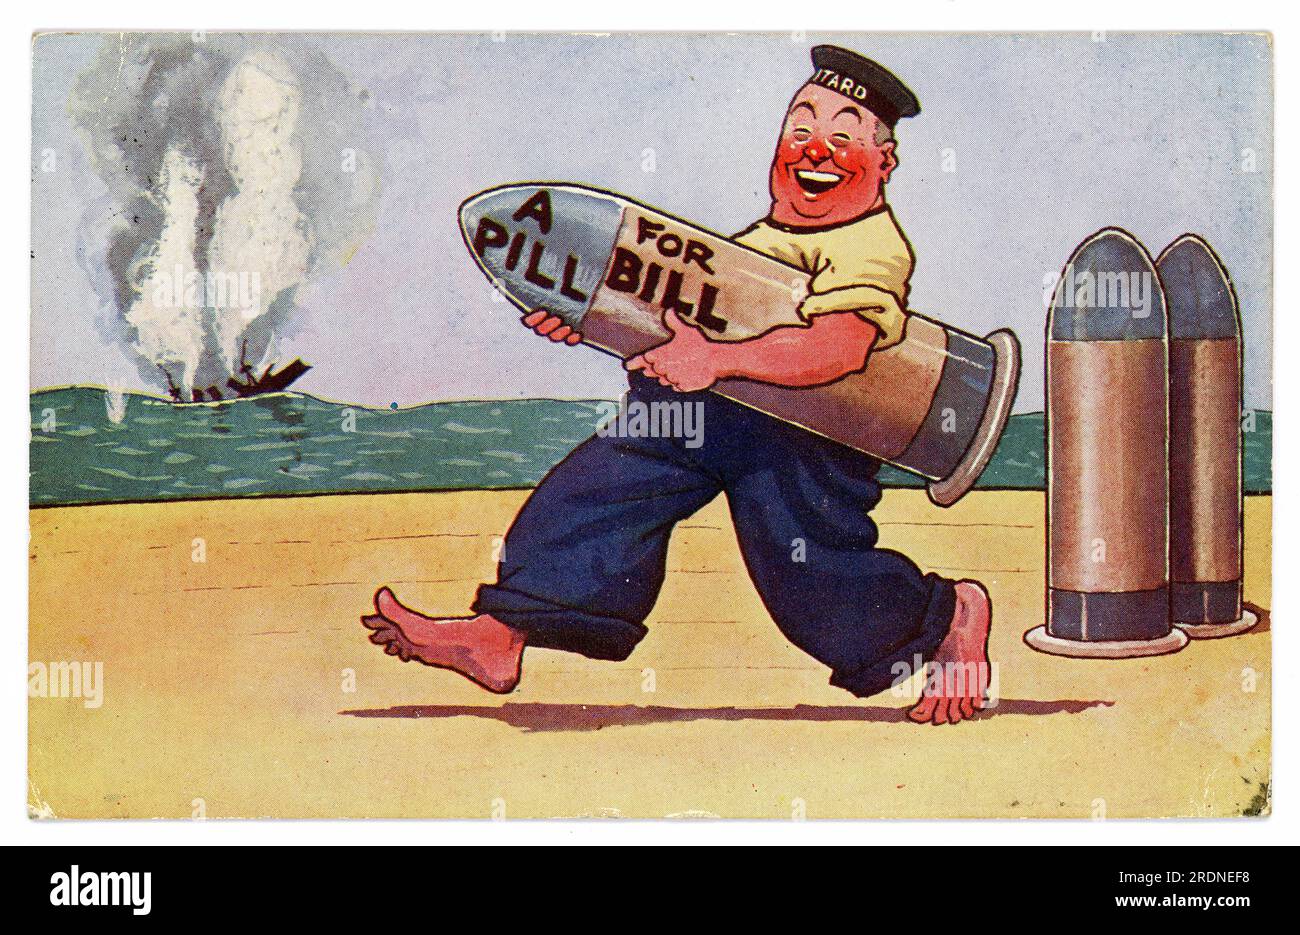 Original WW1 era comic cartoon postcard, sailor carrying a missile, A Pill for Bill, The postcard is on a popular theme - anti-Kaiser Wilhelm II (last German emperor and King of Prussia) of the German Empire.. Dated / posted 1915. Stock Photo